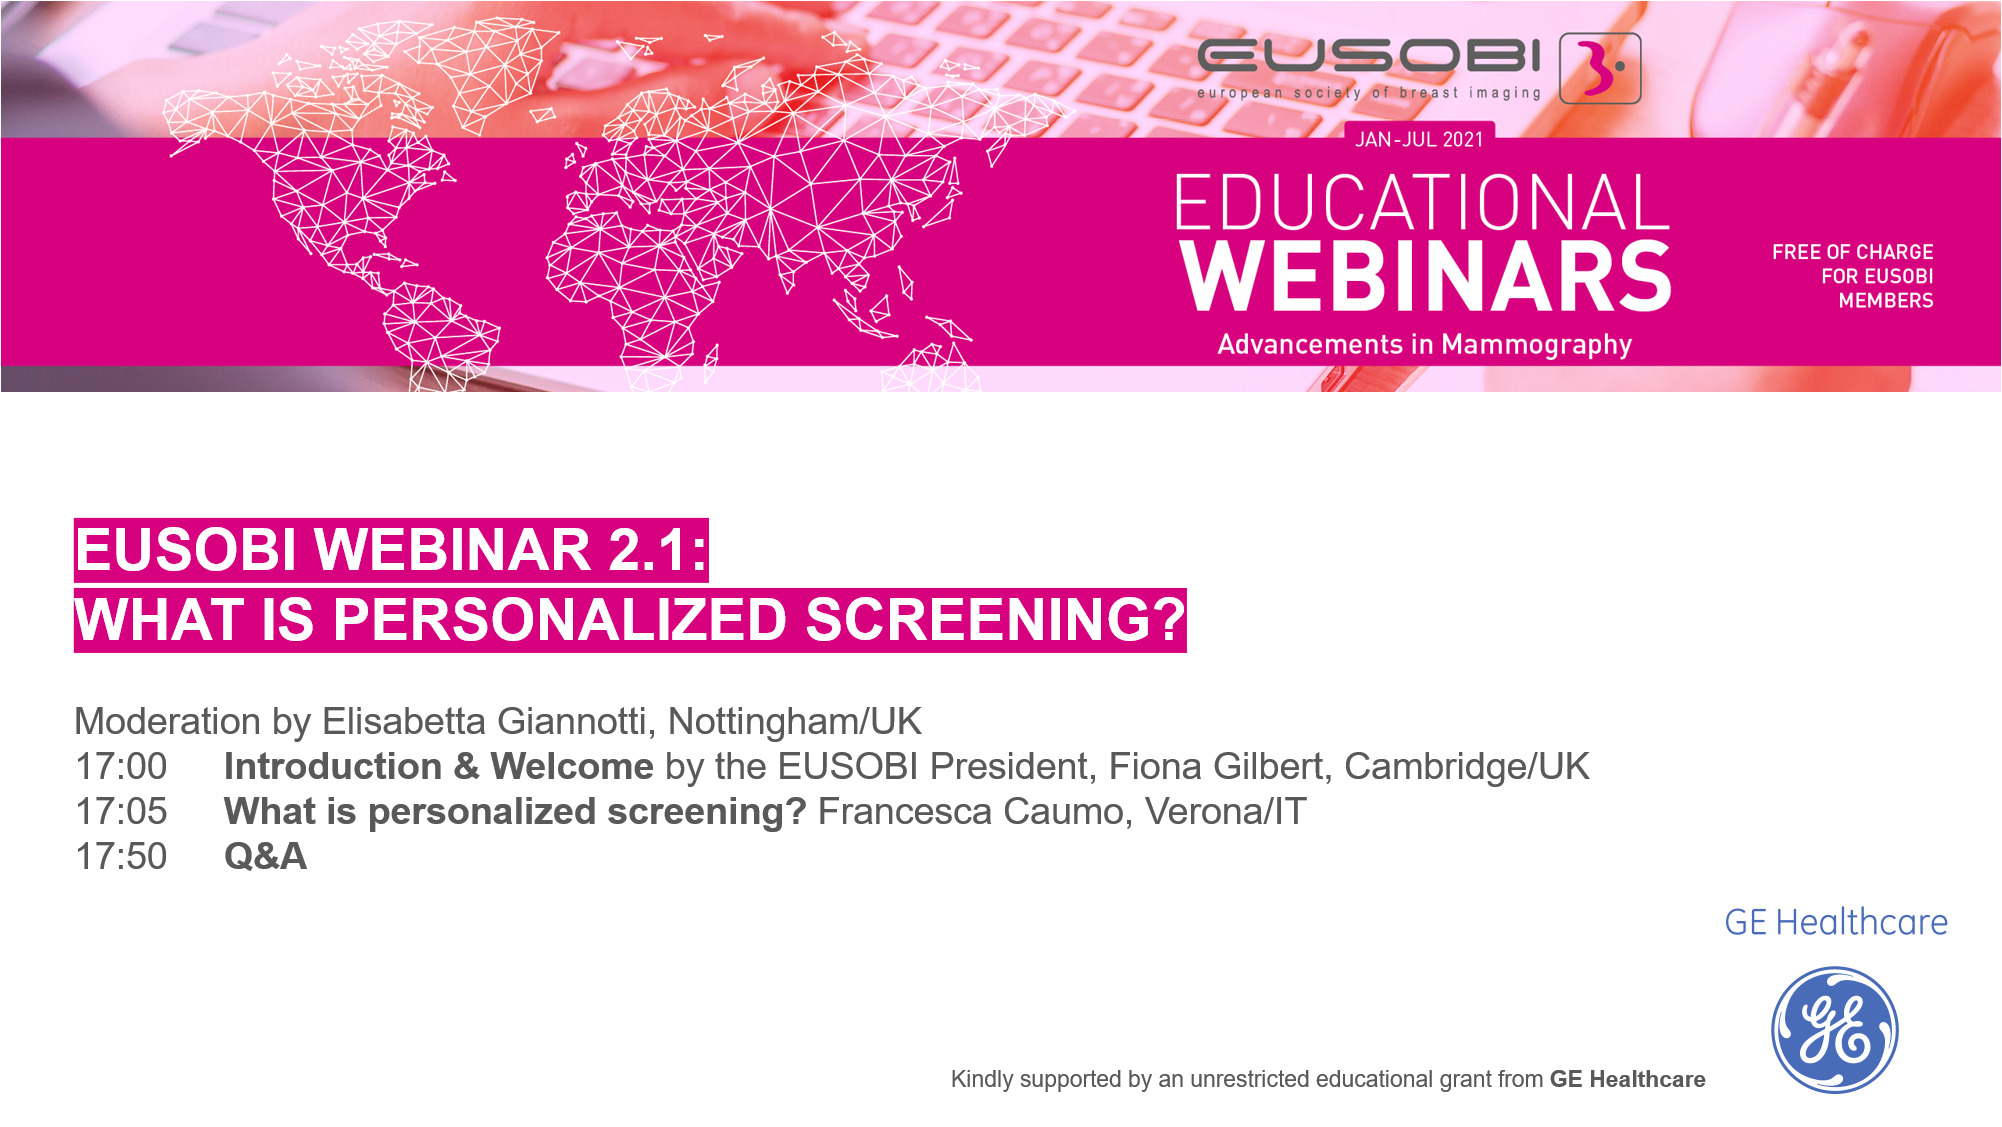 2.1 / What is personalized screening?